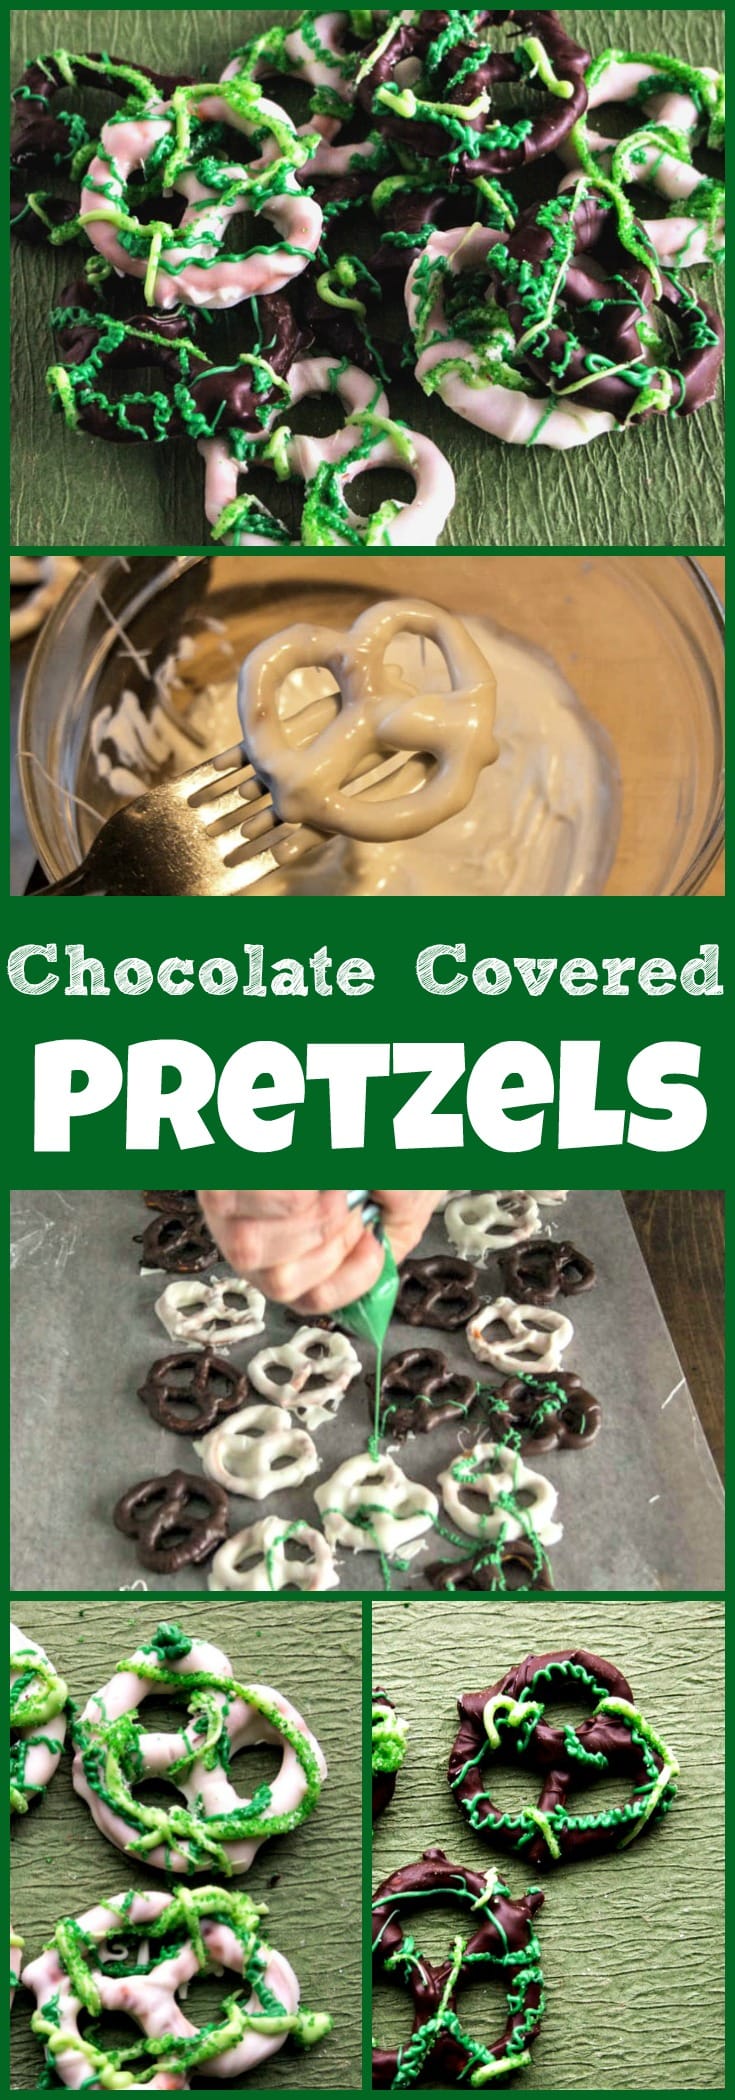 Chocolate Covered Pretzels recipe for St. Patrick's Day - an easy sweet and salty treat